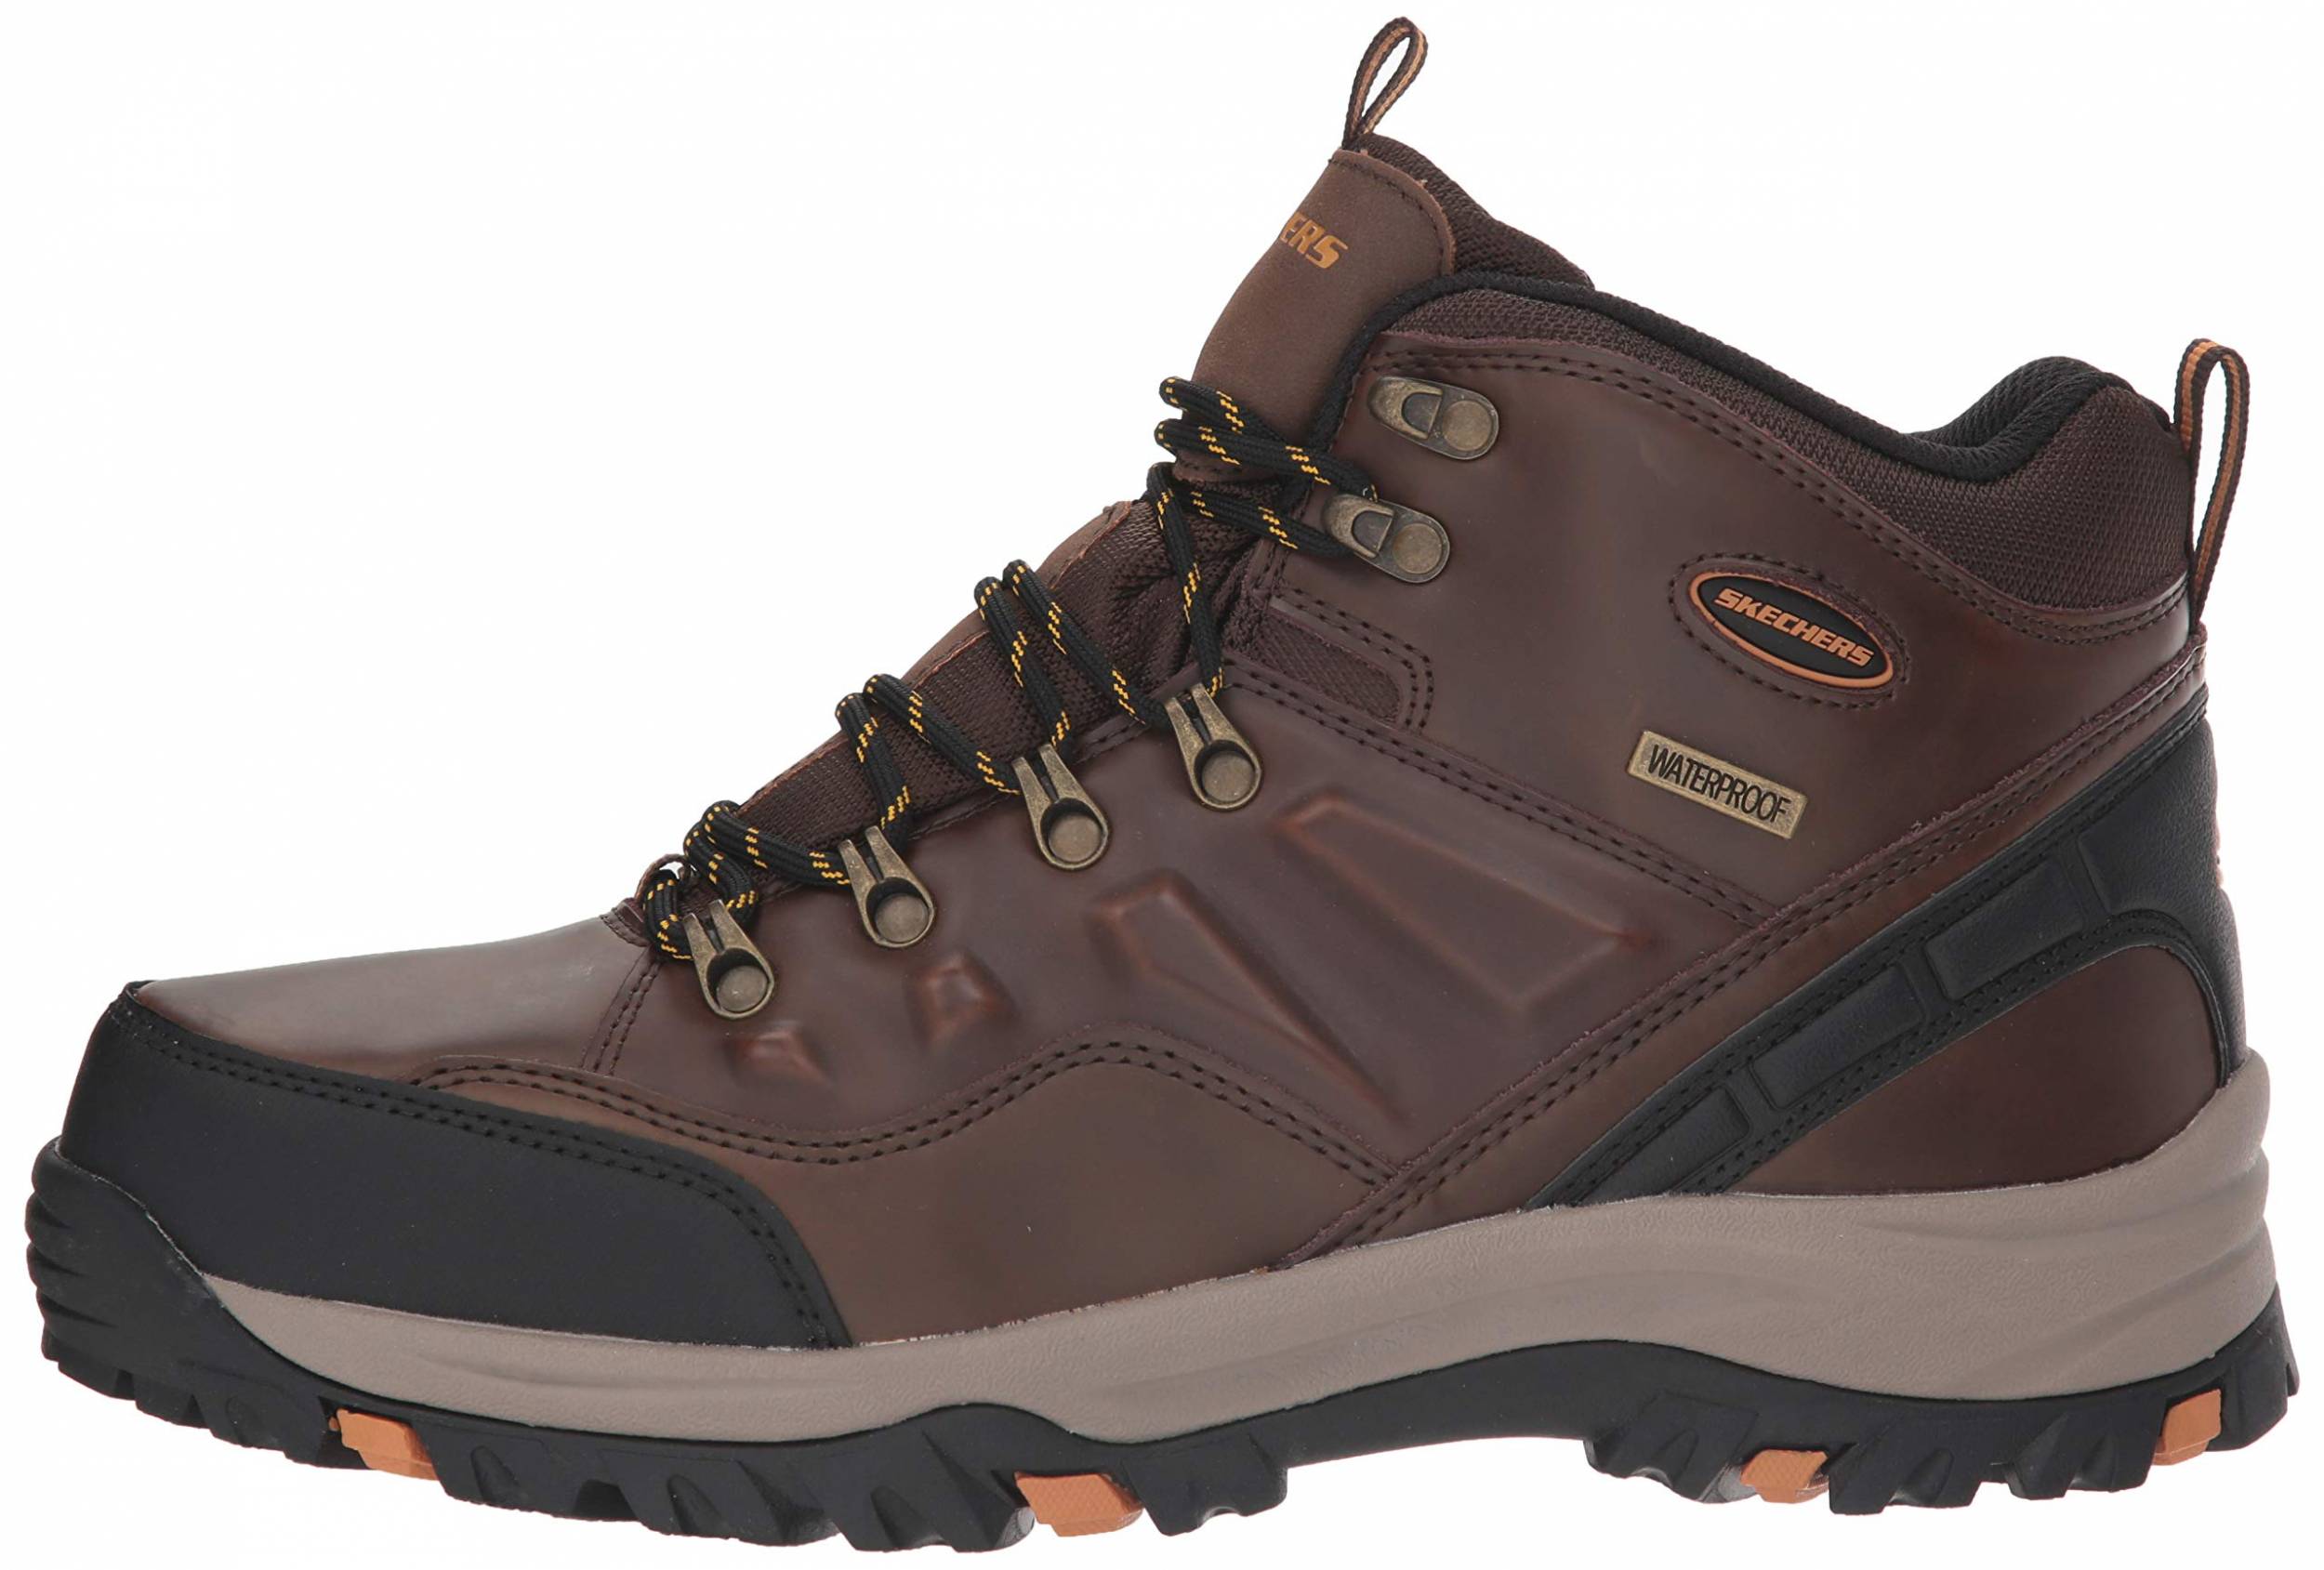 Save 25% on Cheap Hiking Boots (54 